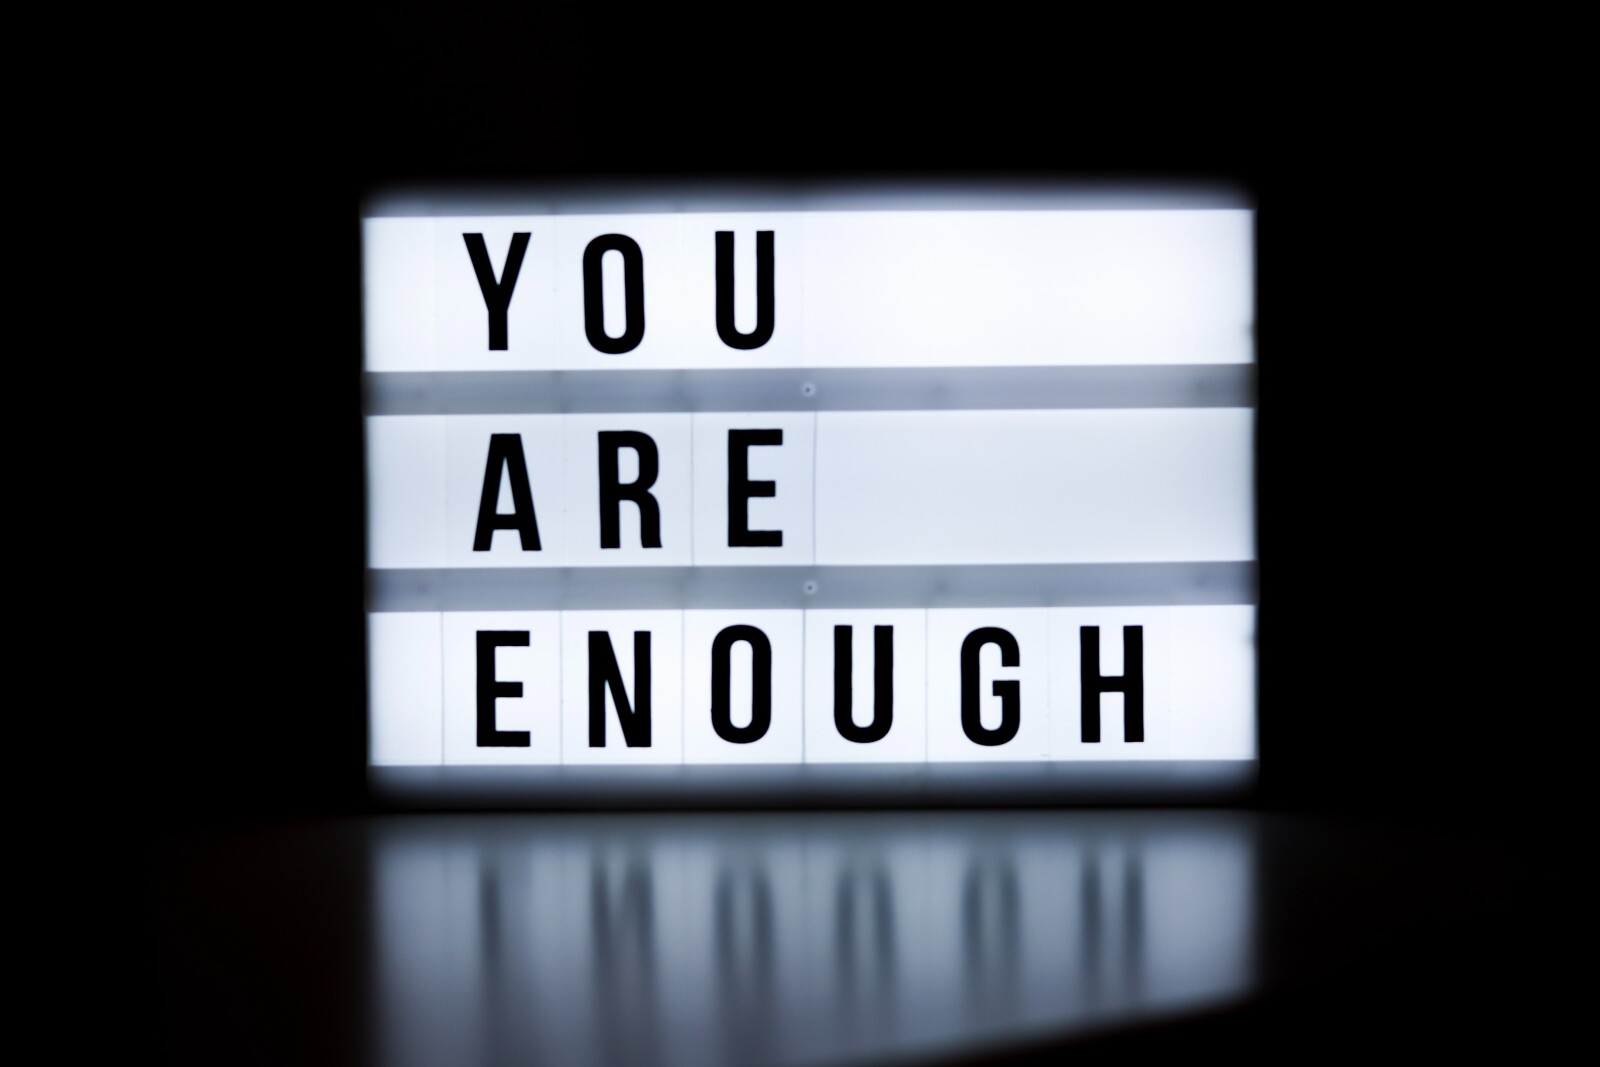 You are Enough…!